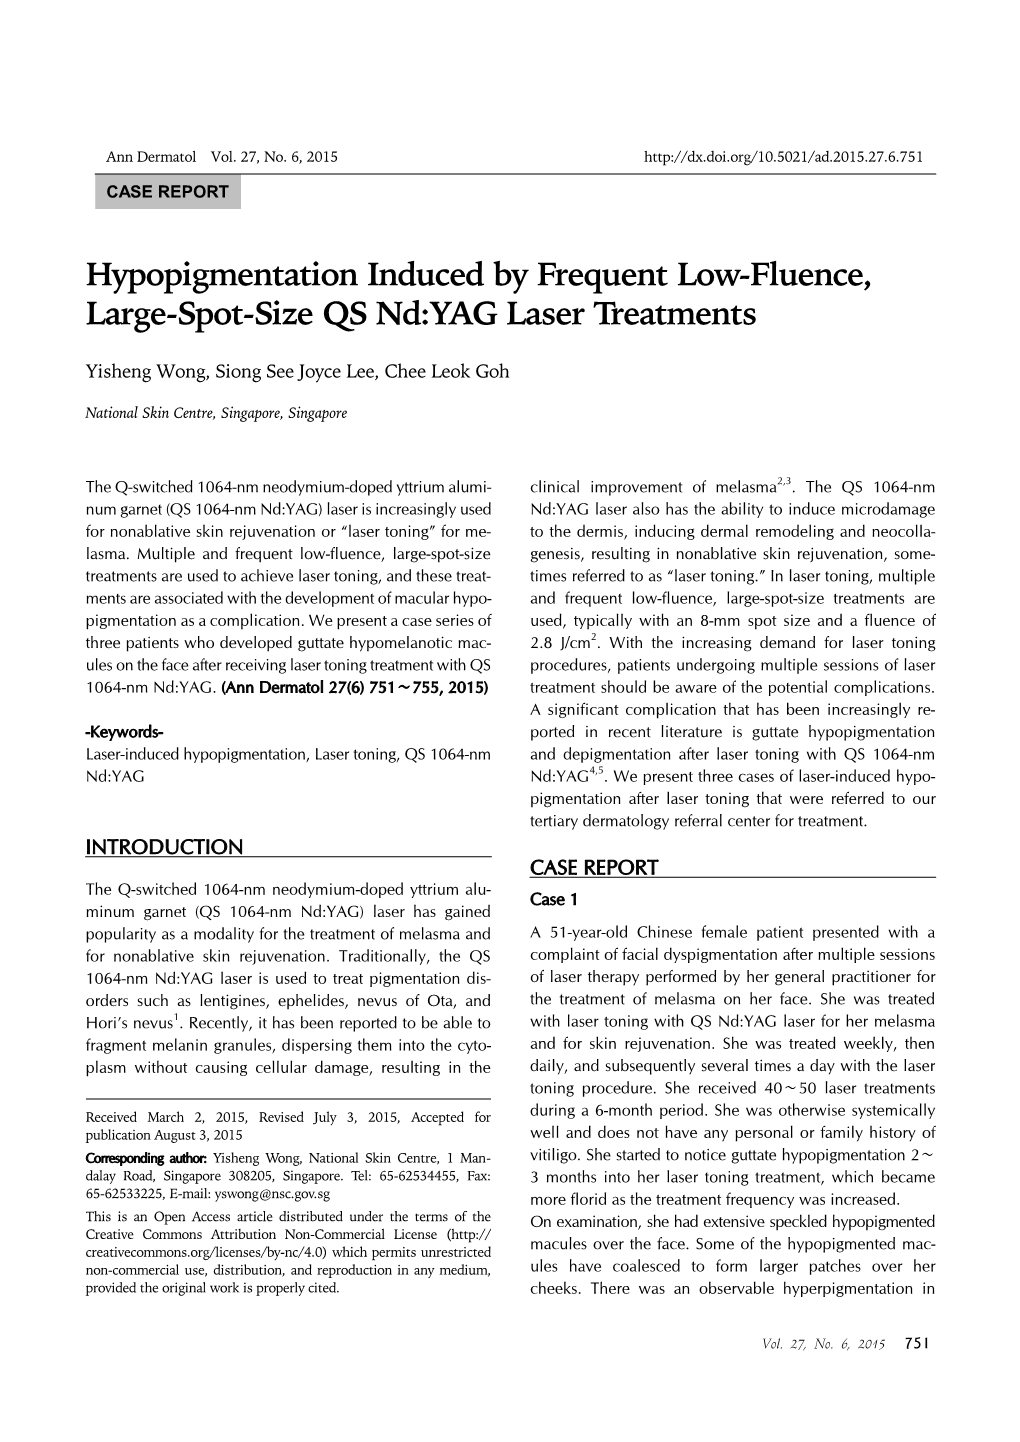 Hypopigmentation Induced by Frequent Low-Fluence, Large-Spot-Size QS Nd:YAG Laser Treatments